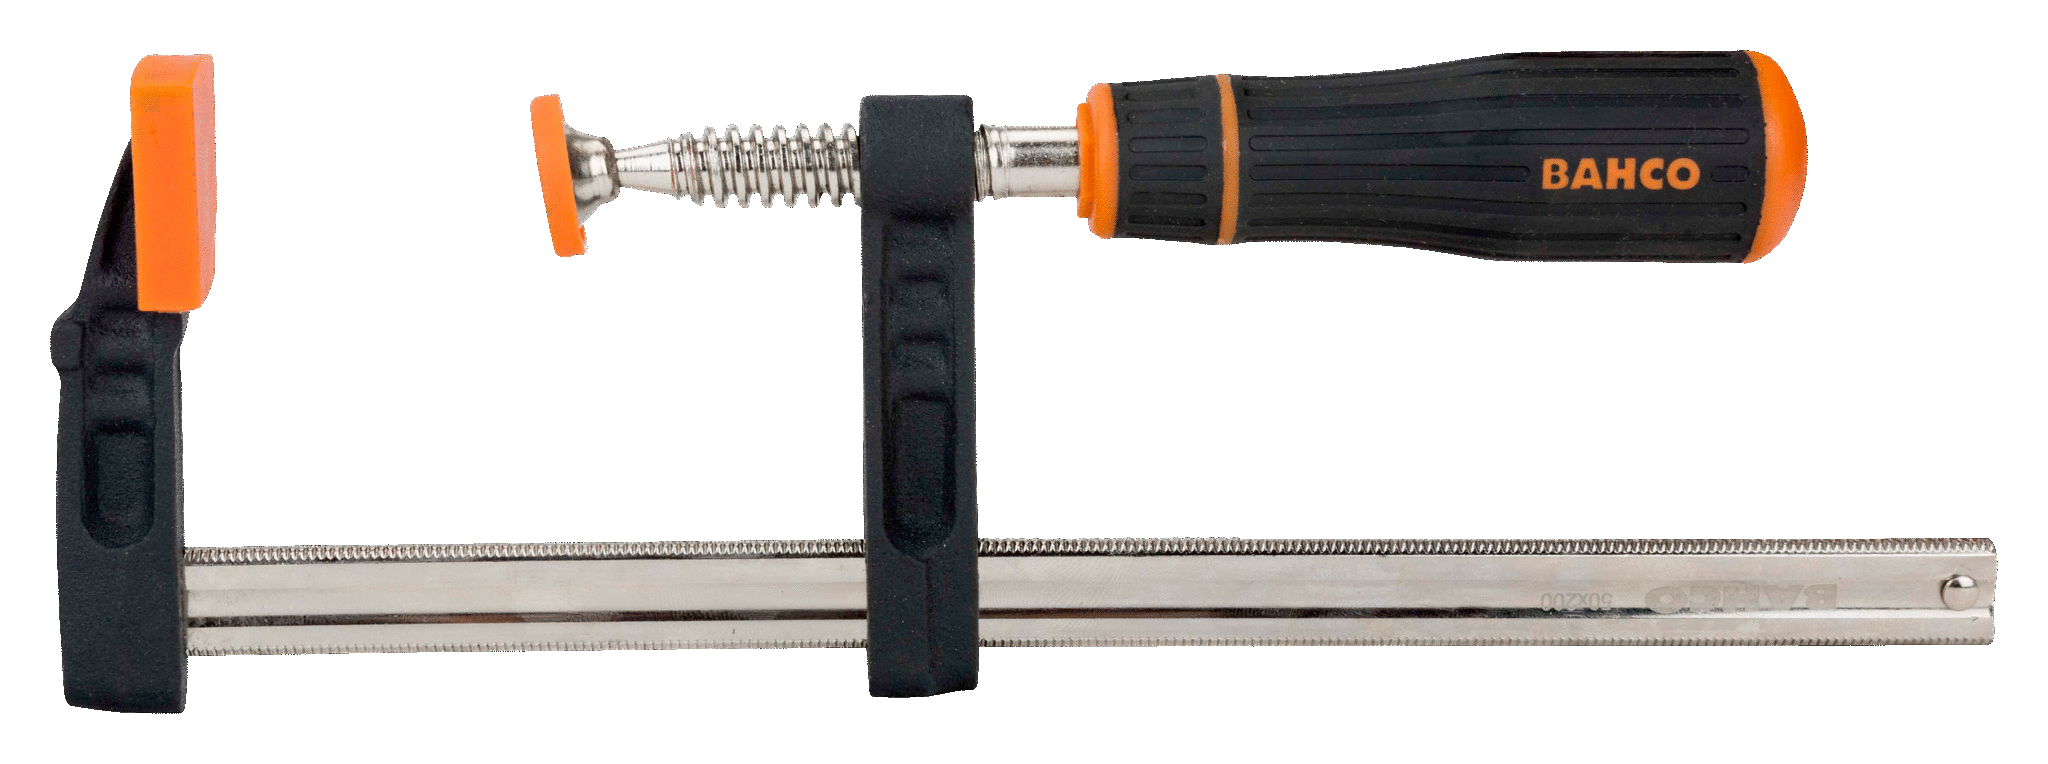 F-Clamps with Rubberised Handle - 420SH-120-1000 by Bahco